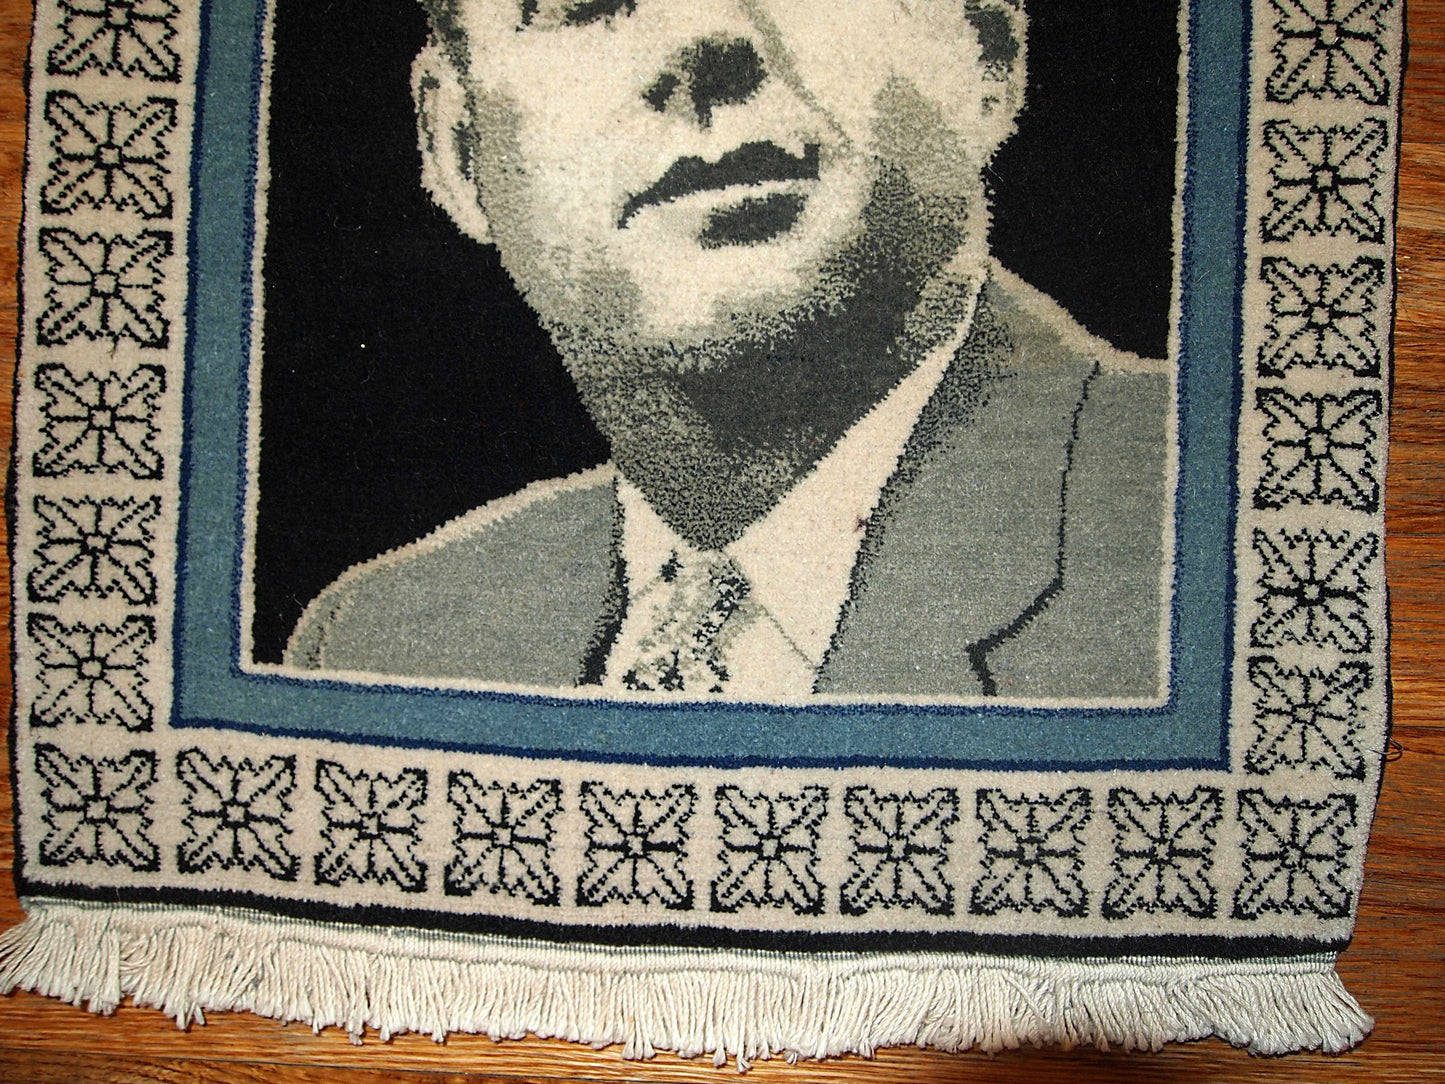 This vintage Persian Tabriz rug illustrates portrait of J.F. Kennedy. Tabriz rugs are one of the best type of Persian carpets. 